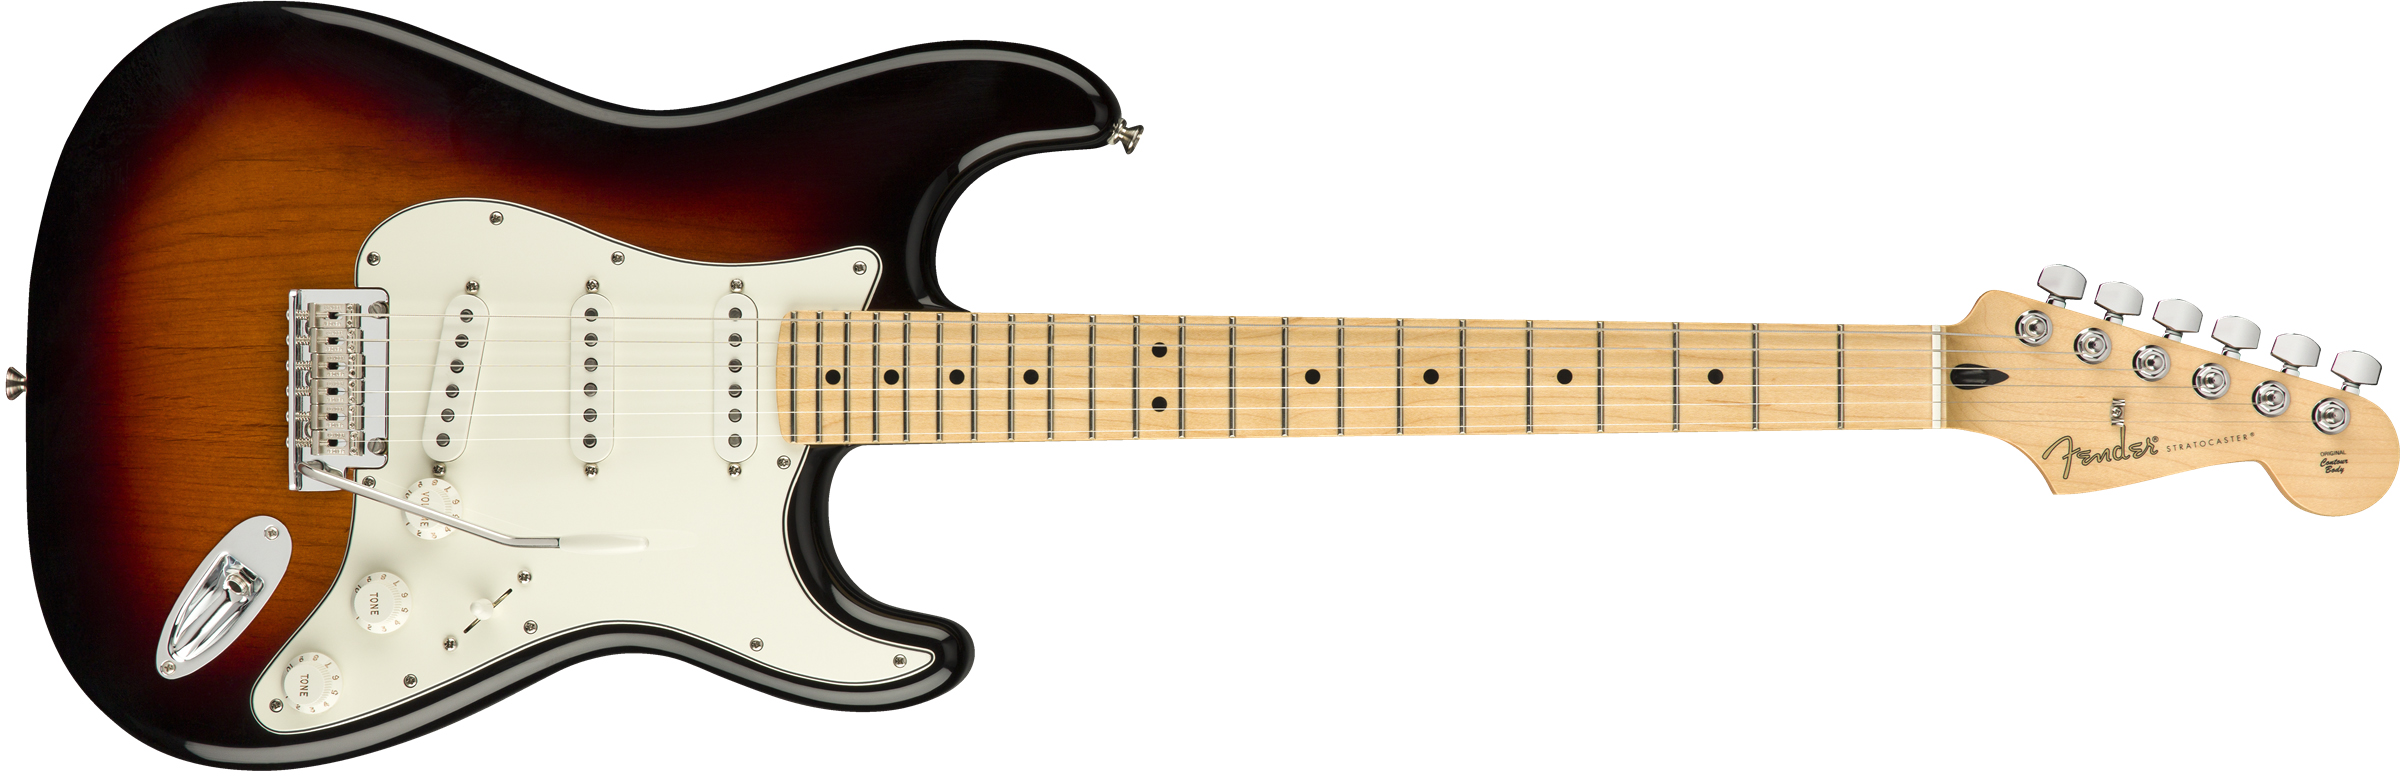 Fender Player Stratocaster MN 3-Color SB | MUSIC STORE professional